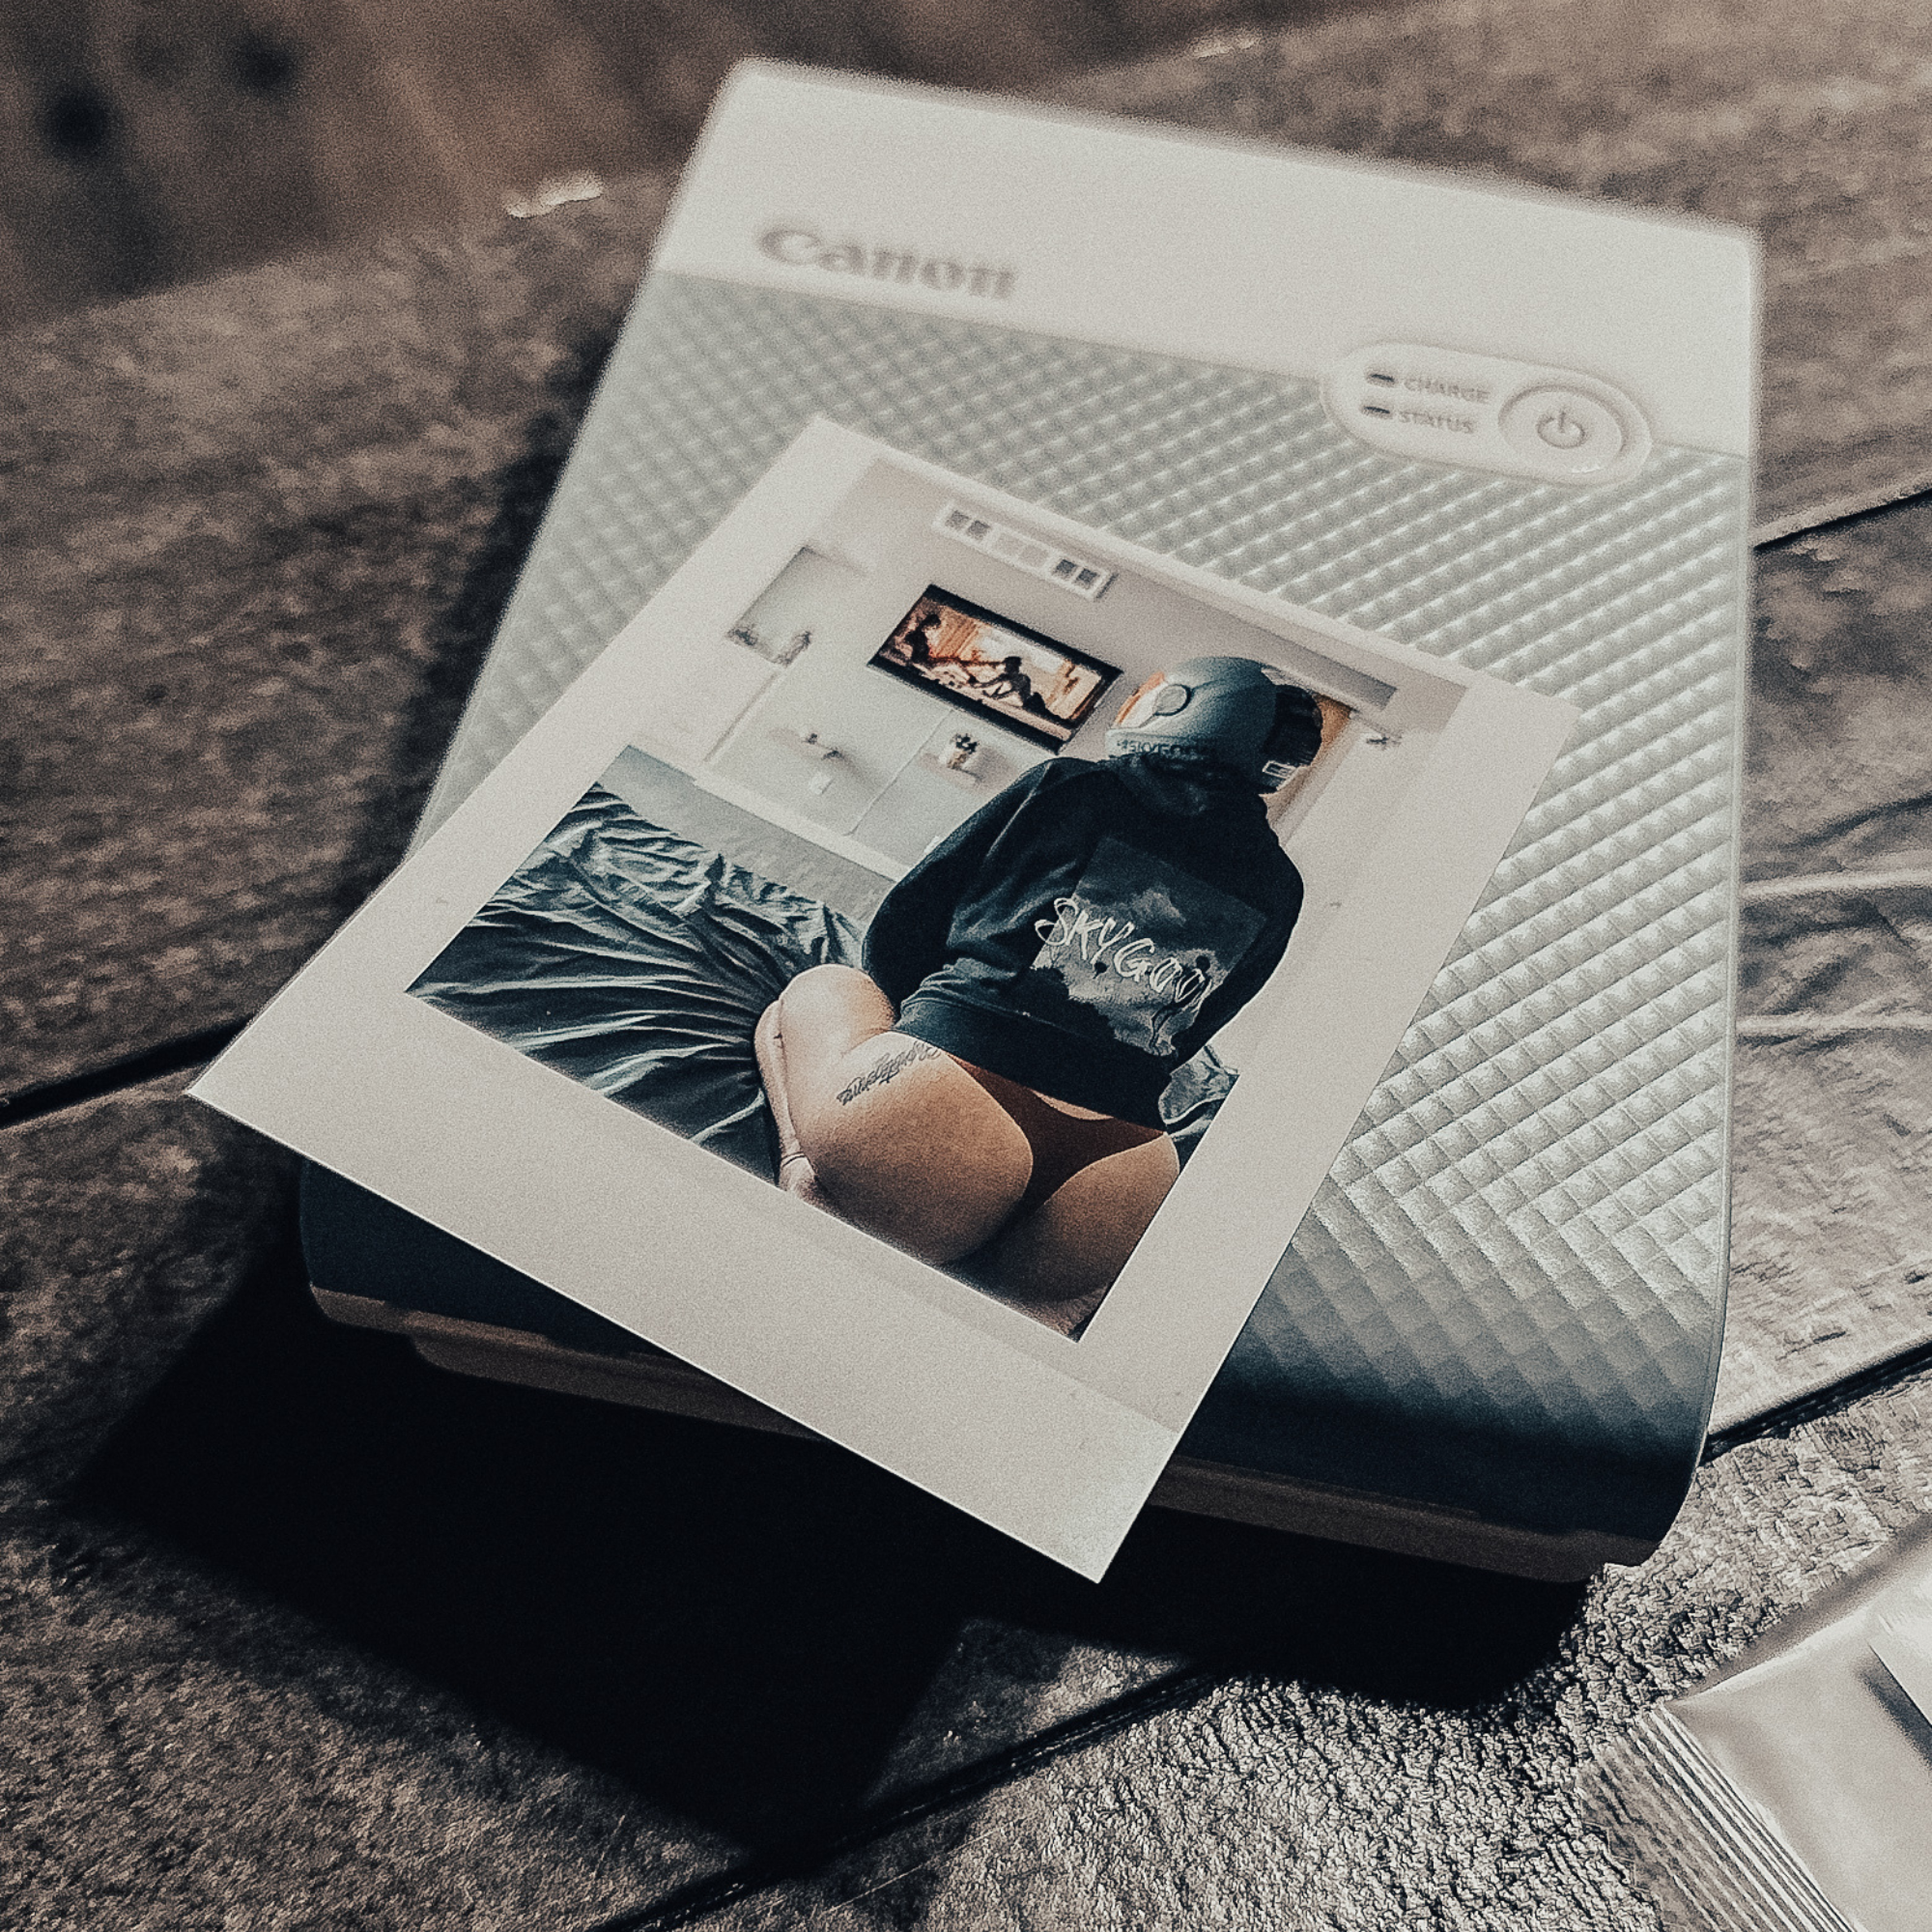 A printed photo of a person in a hoodie and thong sitting on a bed wearing a skydiving helmet, with the photo coming out of a Canon printer, all atop a wooden surface.